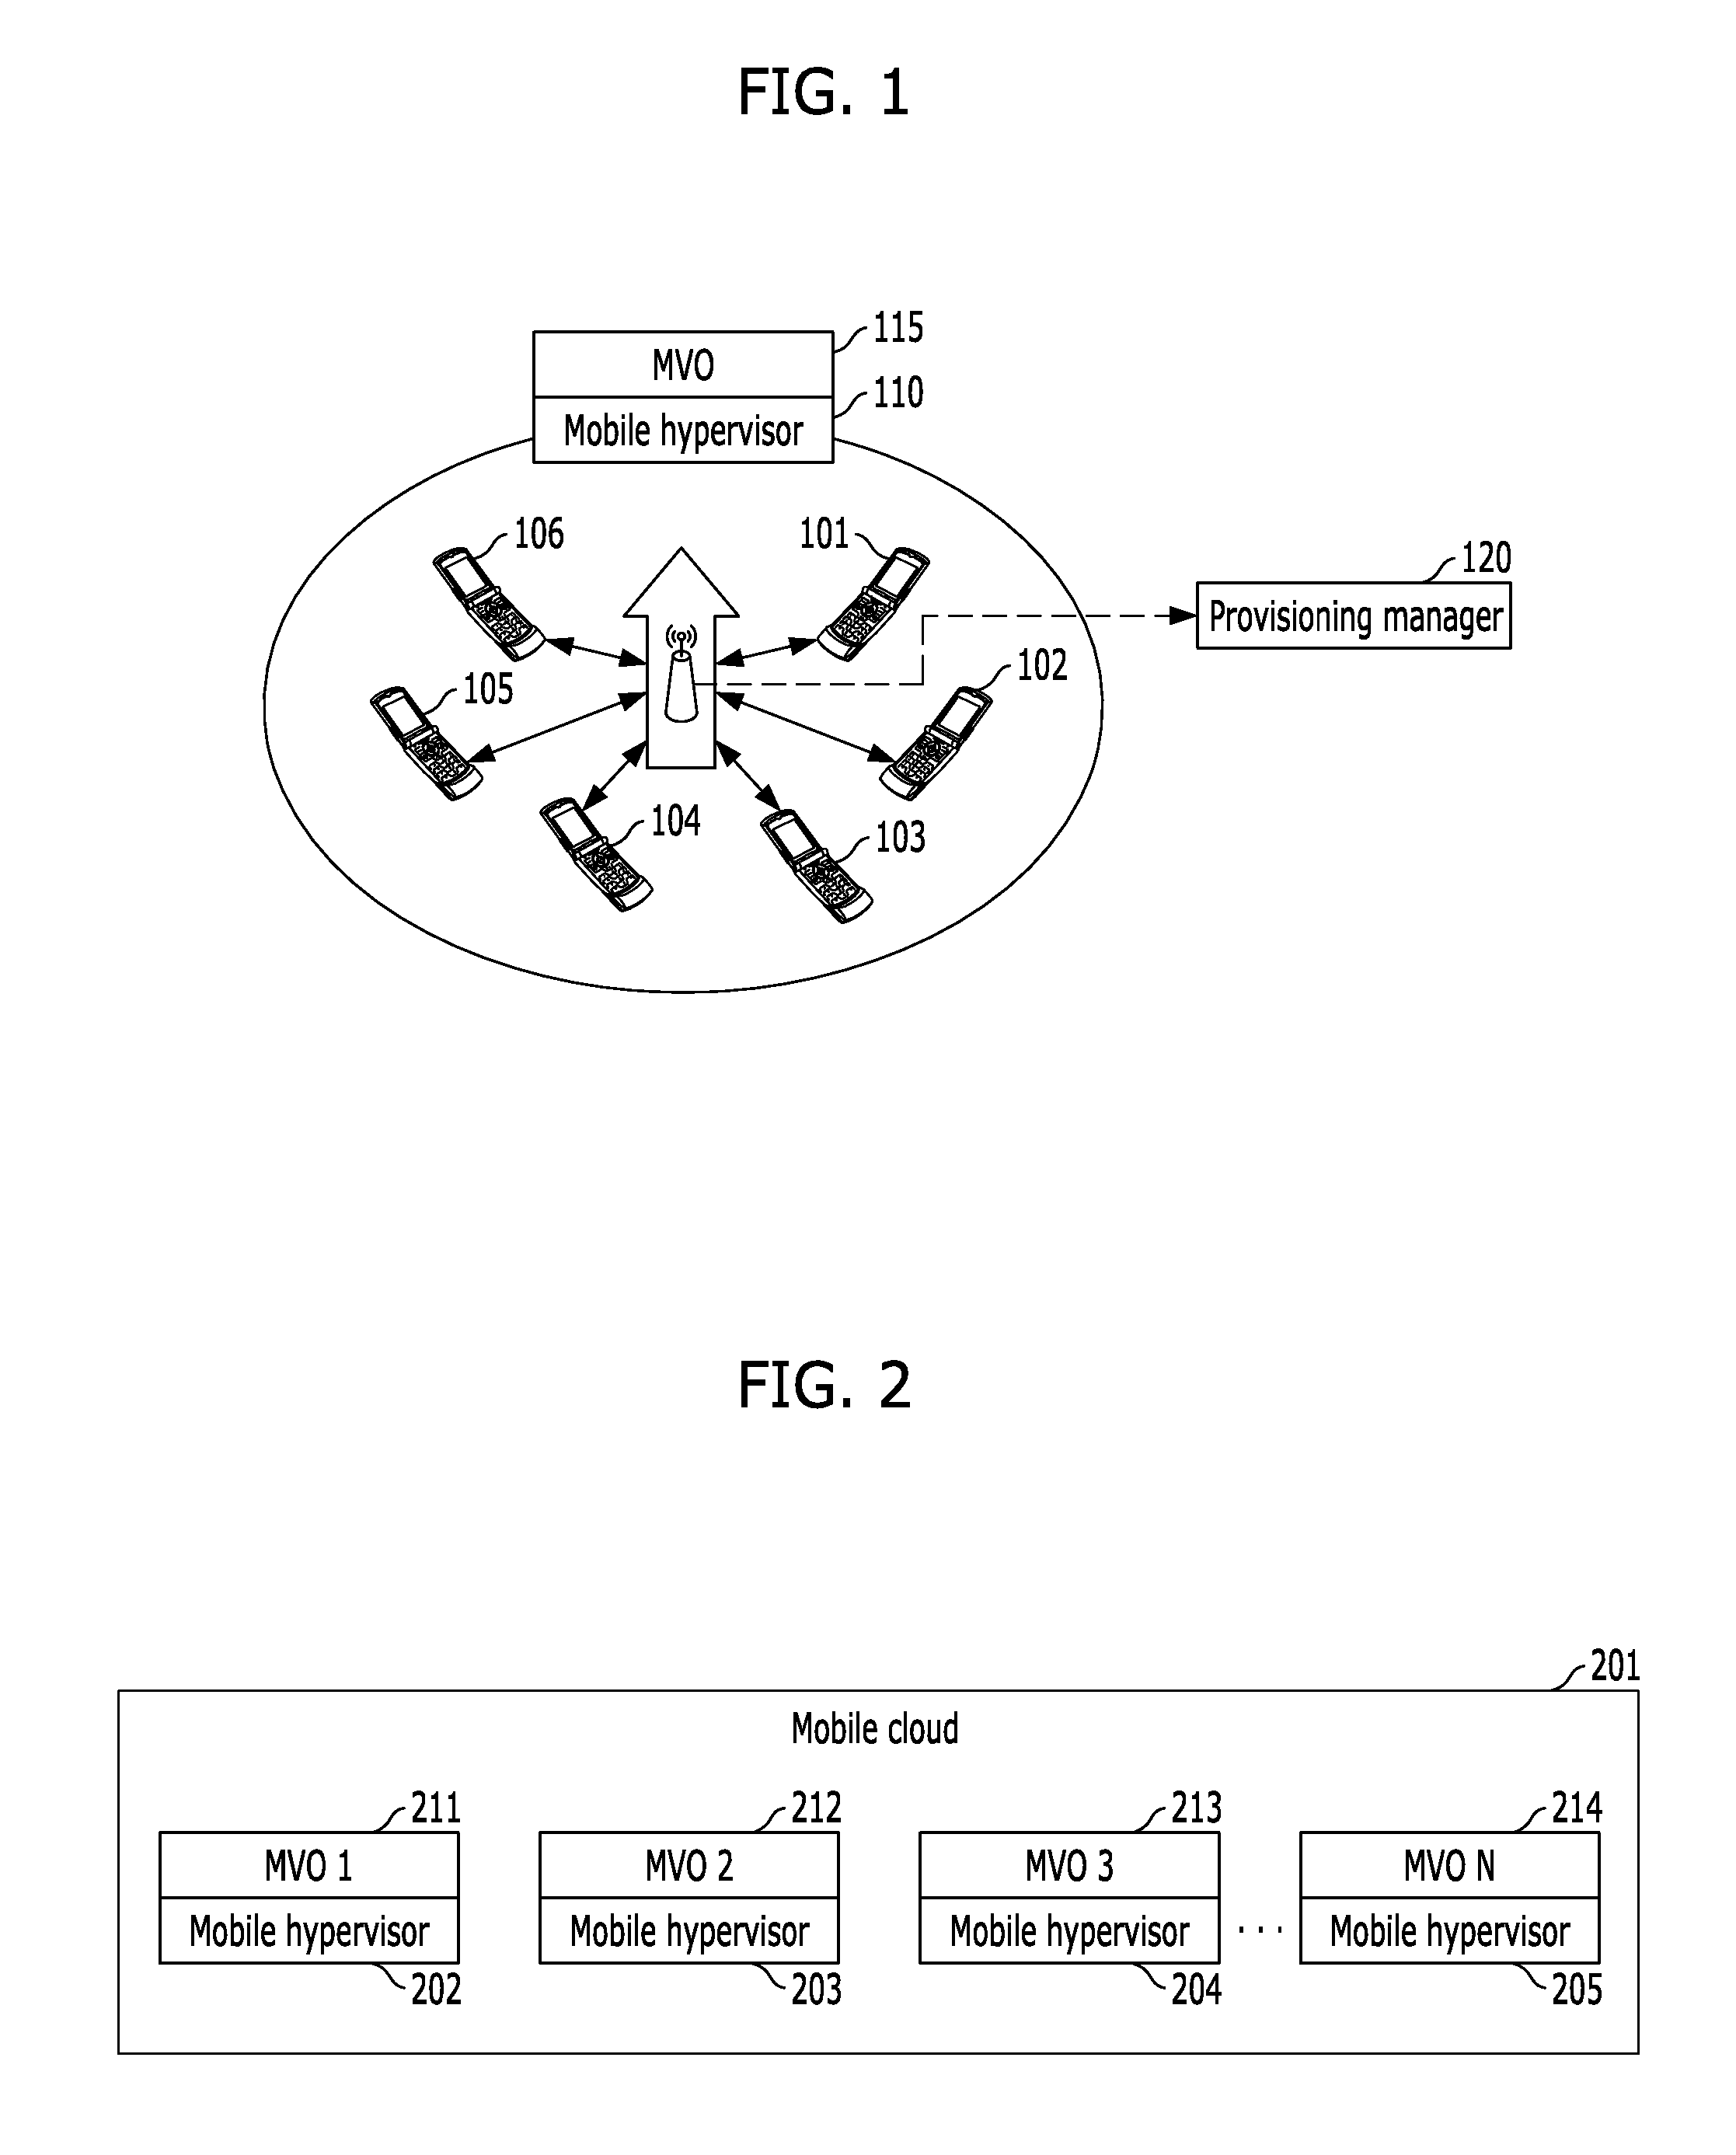 Apparatus and method for distributing cloud computing resources using mobile devices